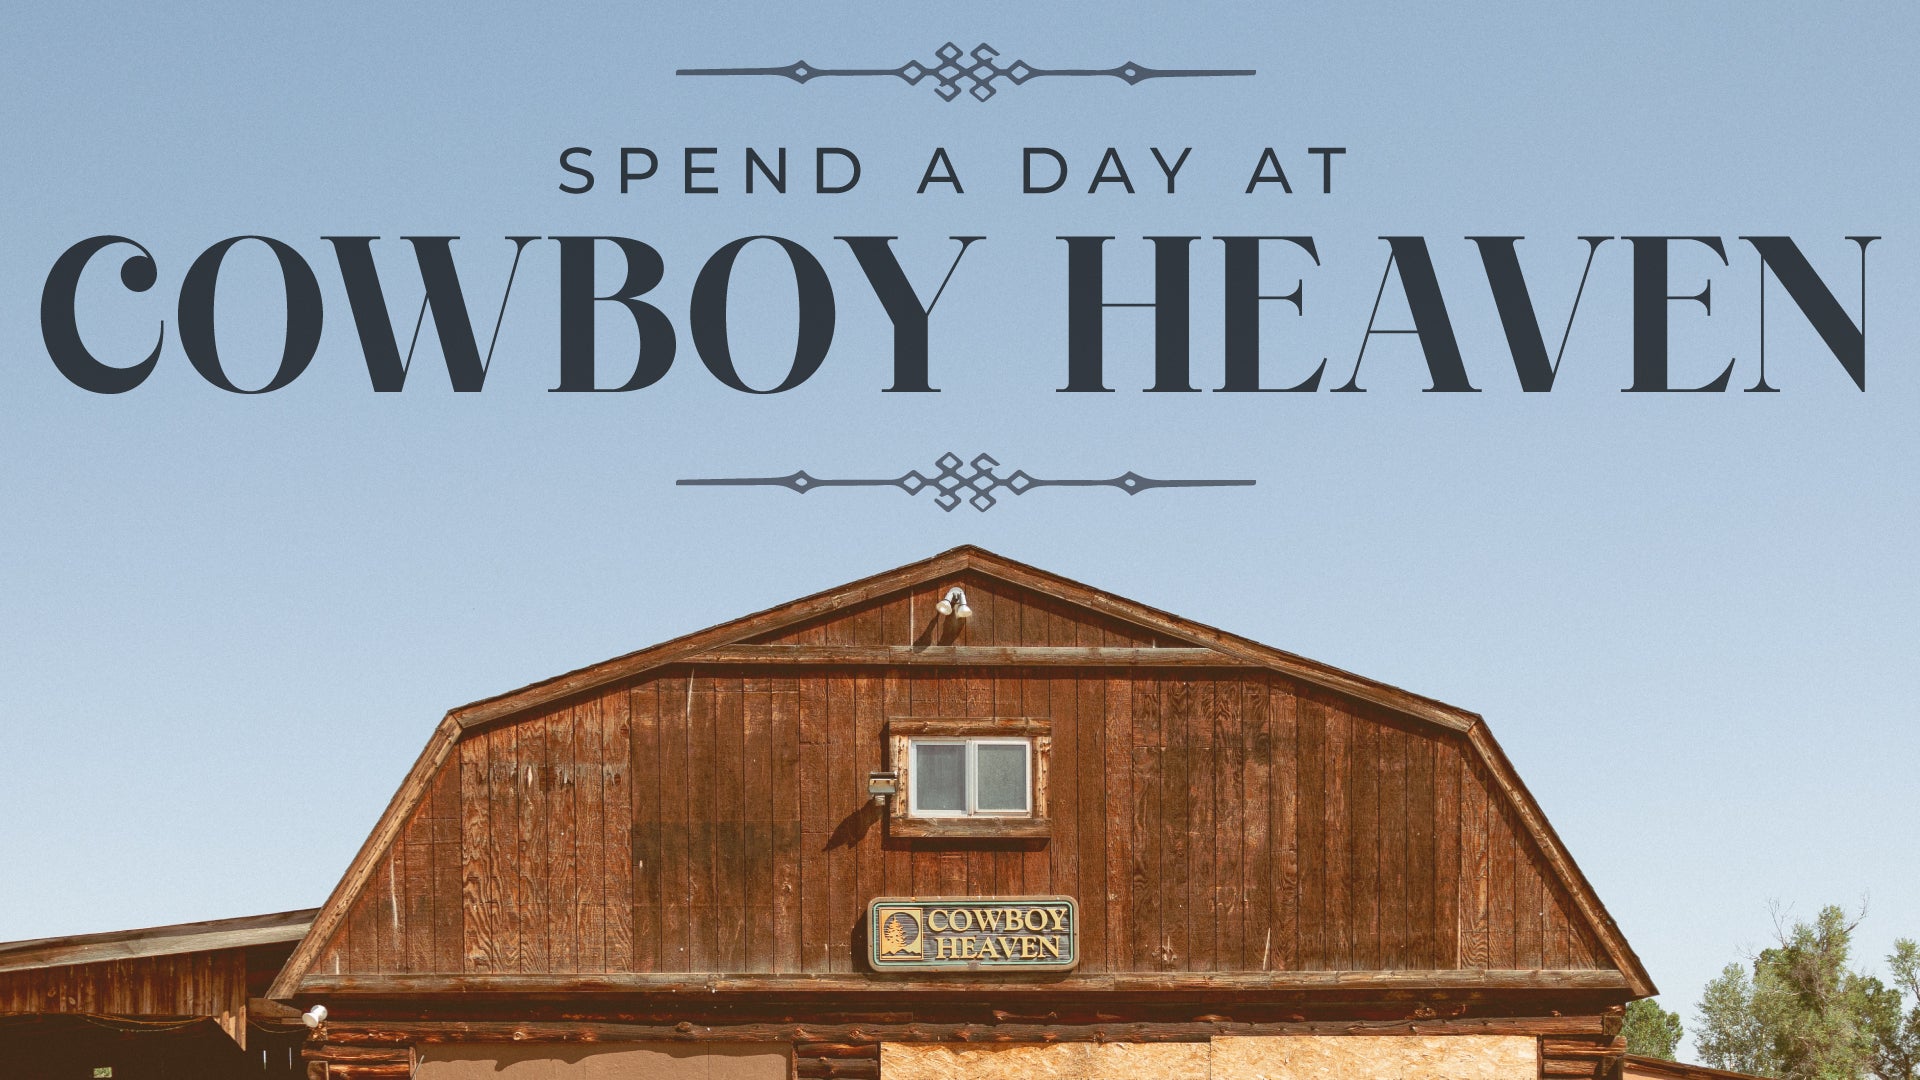 Spend a Day at Cowboy Heaven